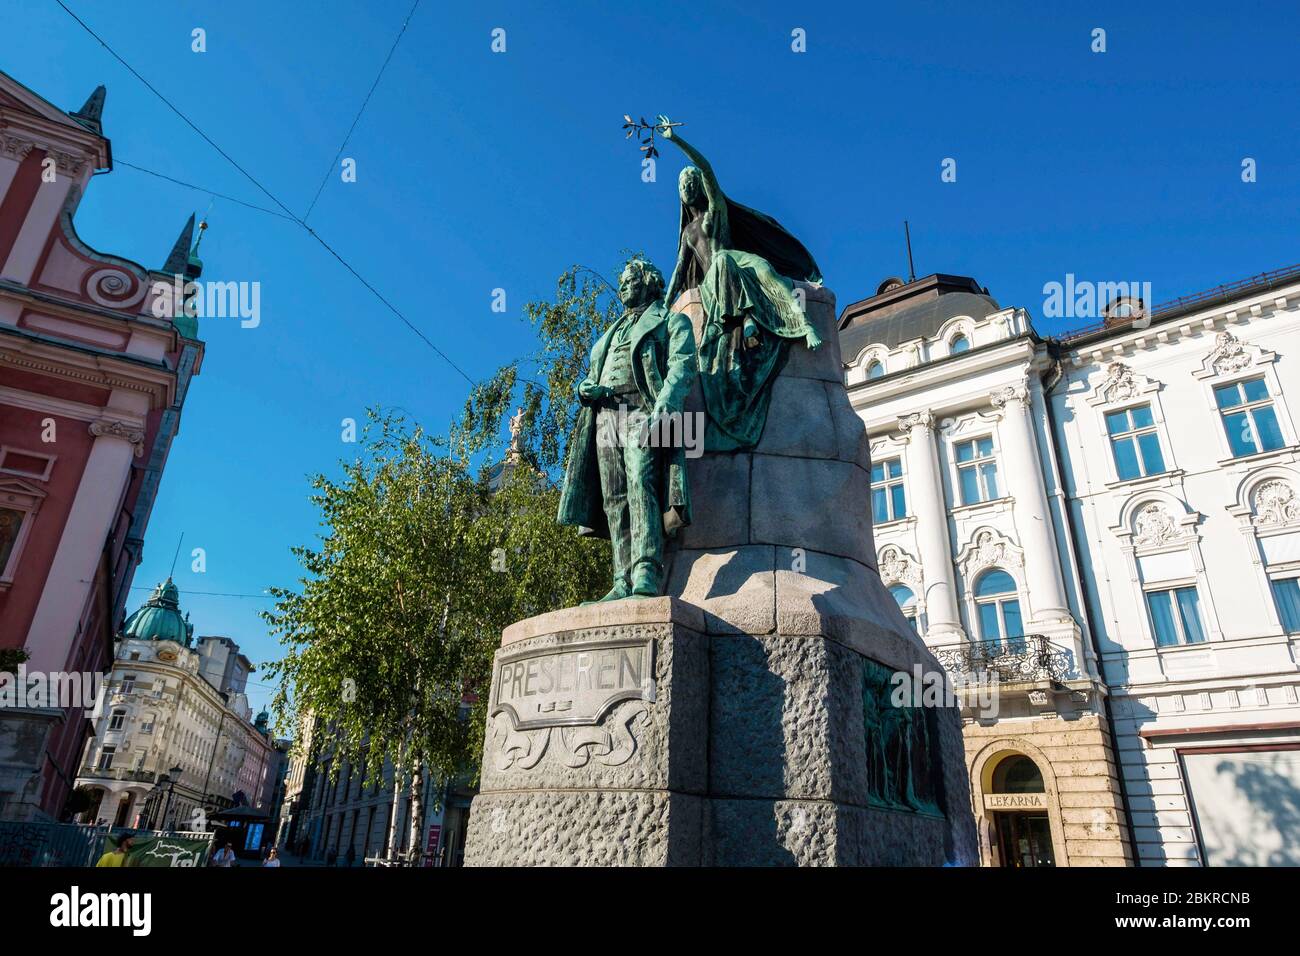 slovenia Ljubljana, statue of the great national poet Preseren, and his muse above him Stock Photo